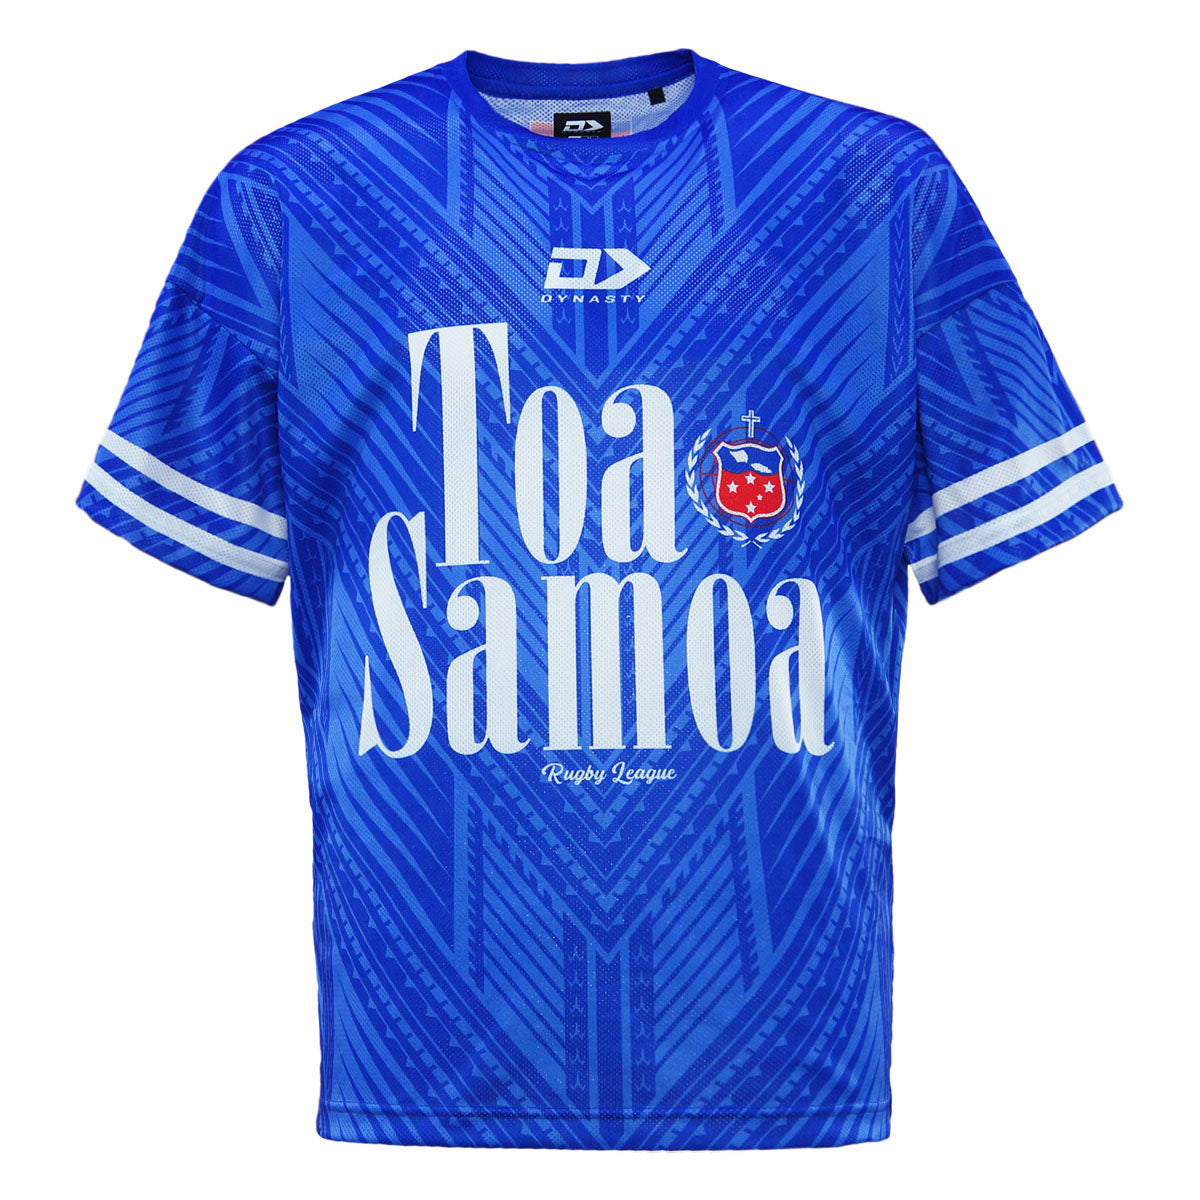 2023 Toa Samoa Rugby League Mens Blue Oversized Tee-FRONT